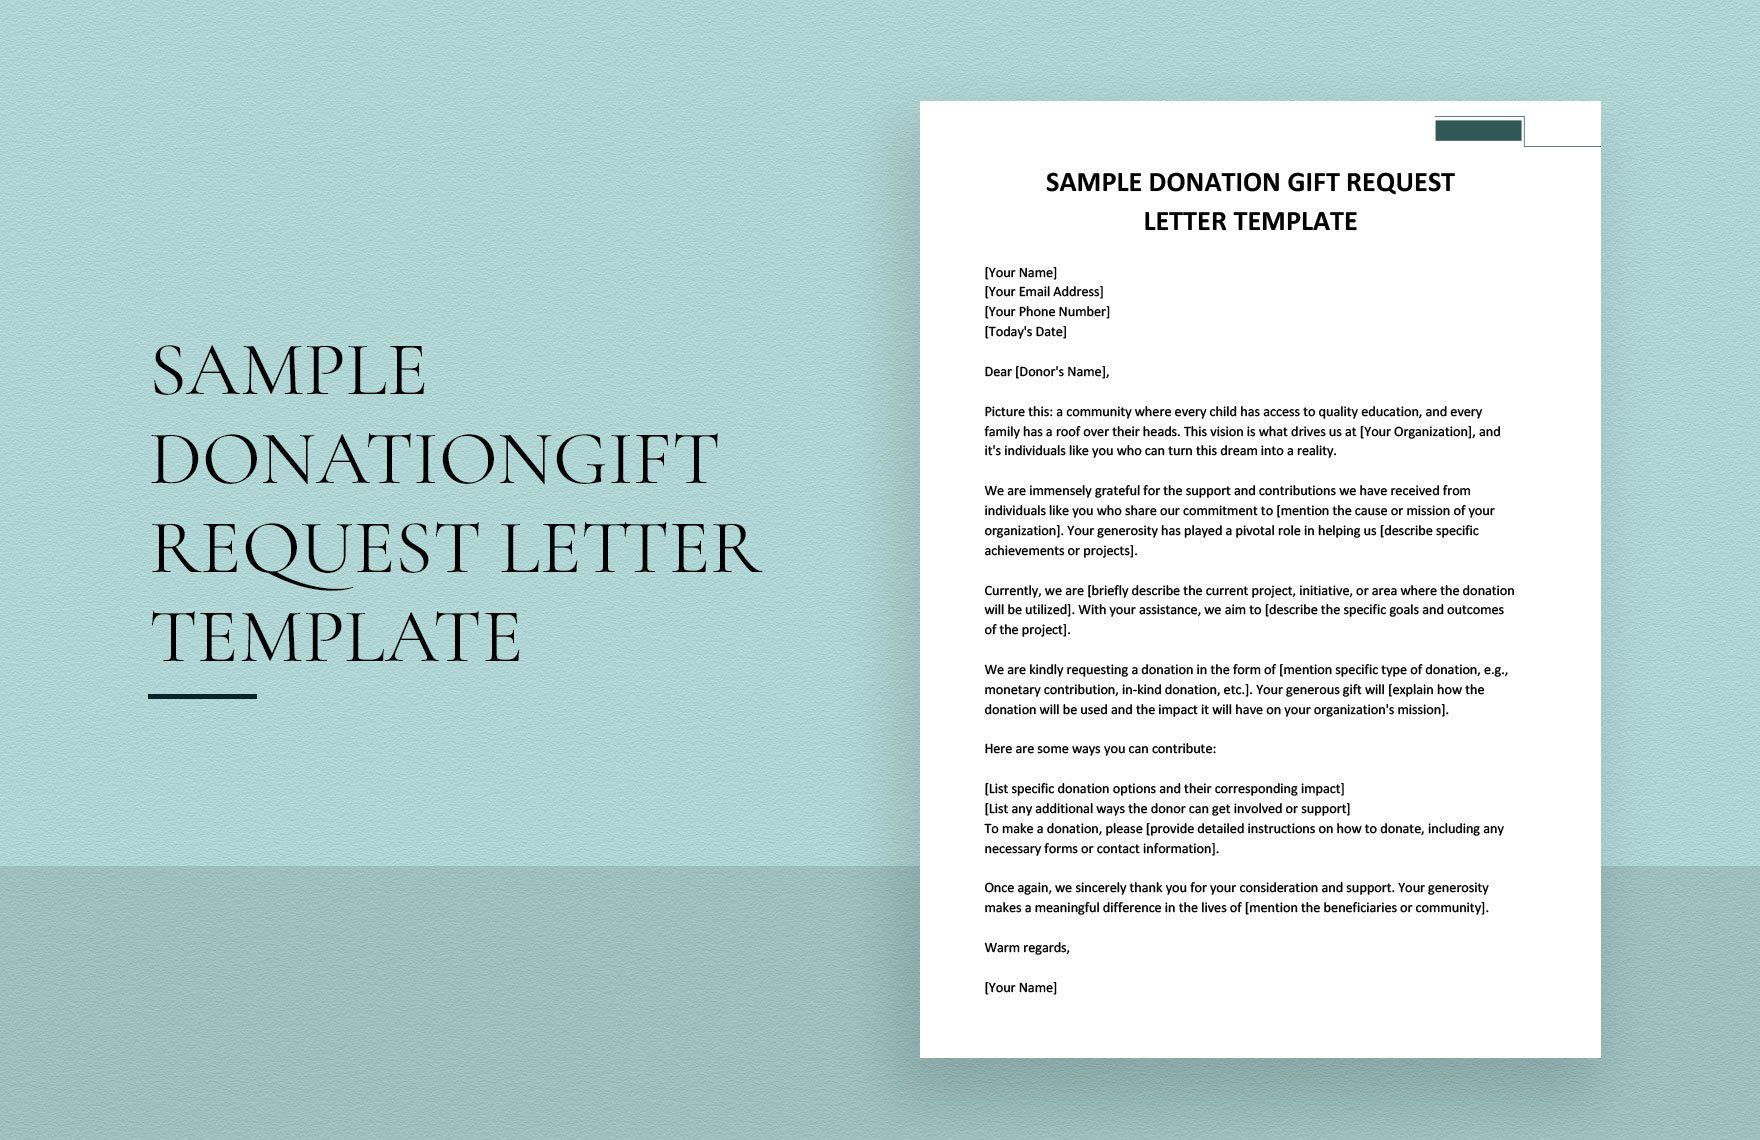 Sample Donation/Gift Request Letter Template